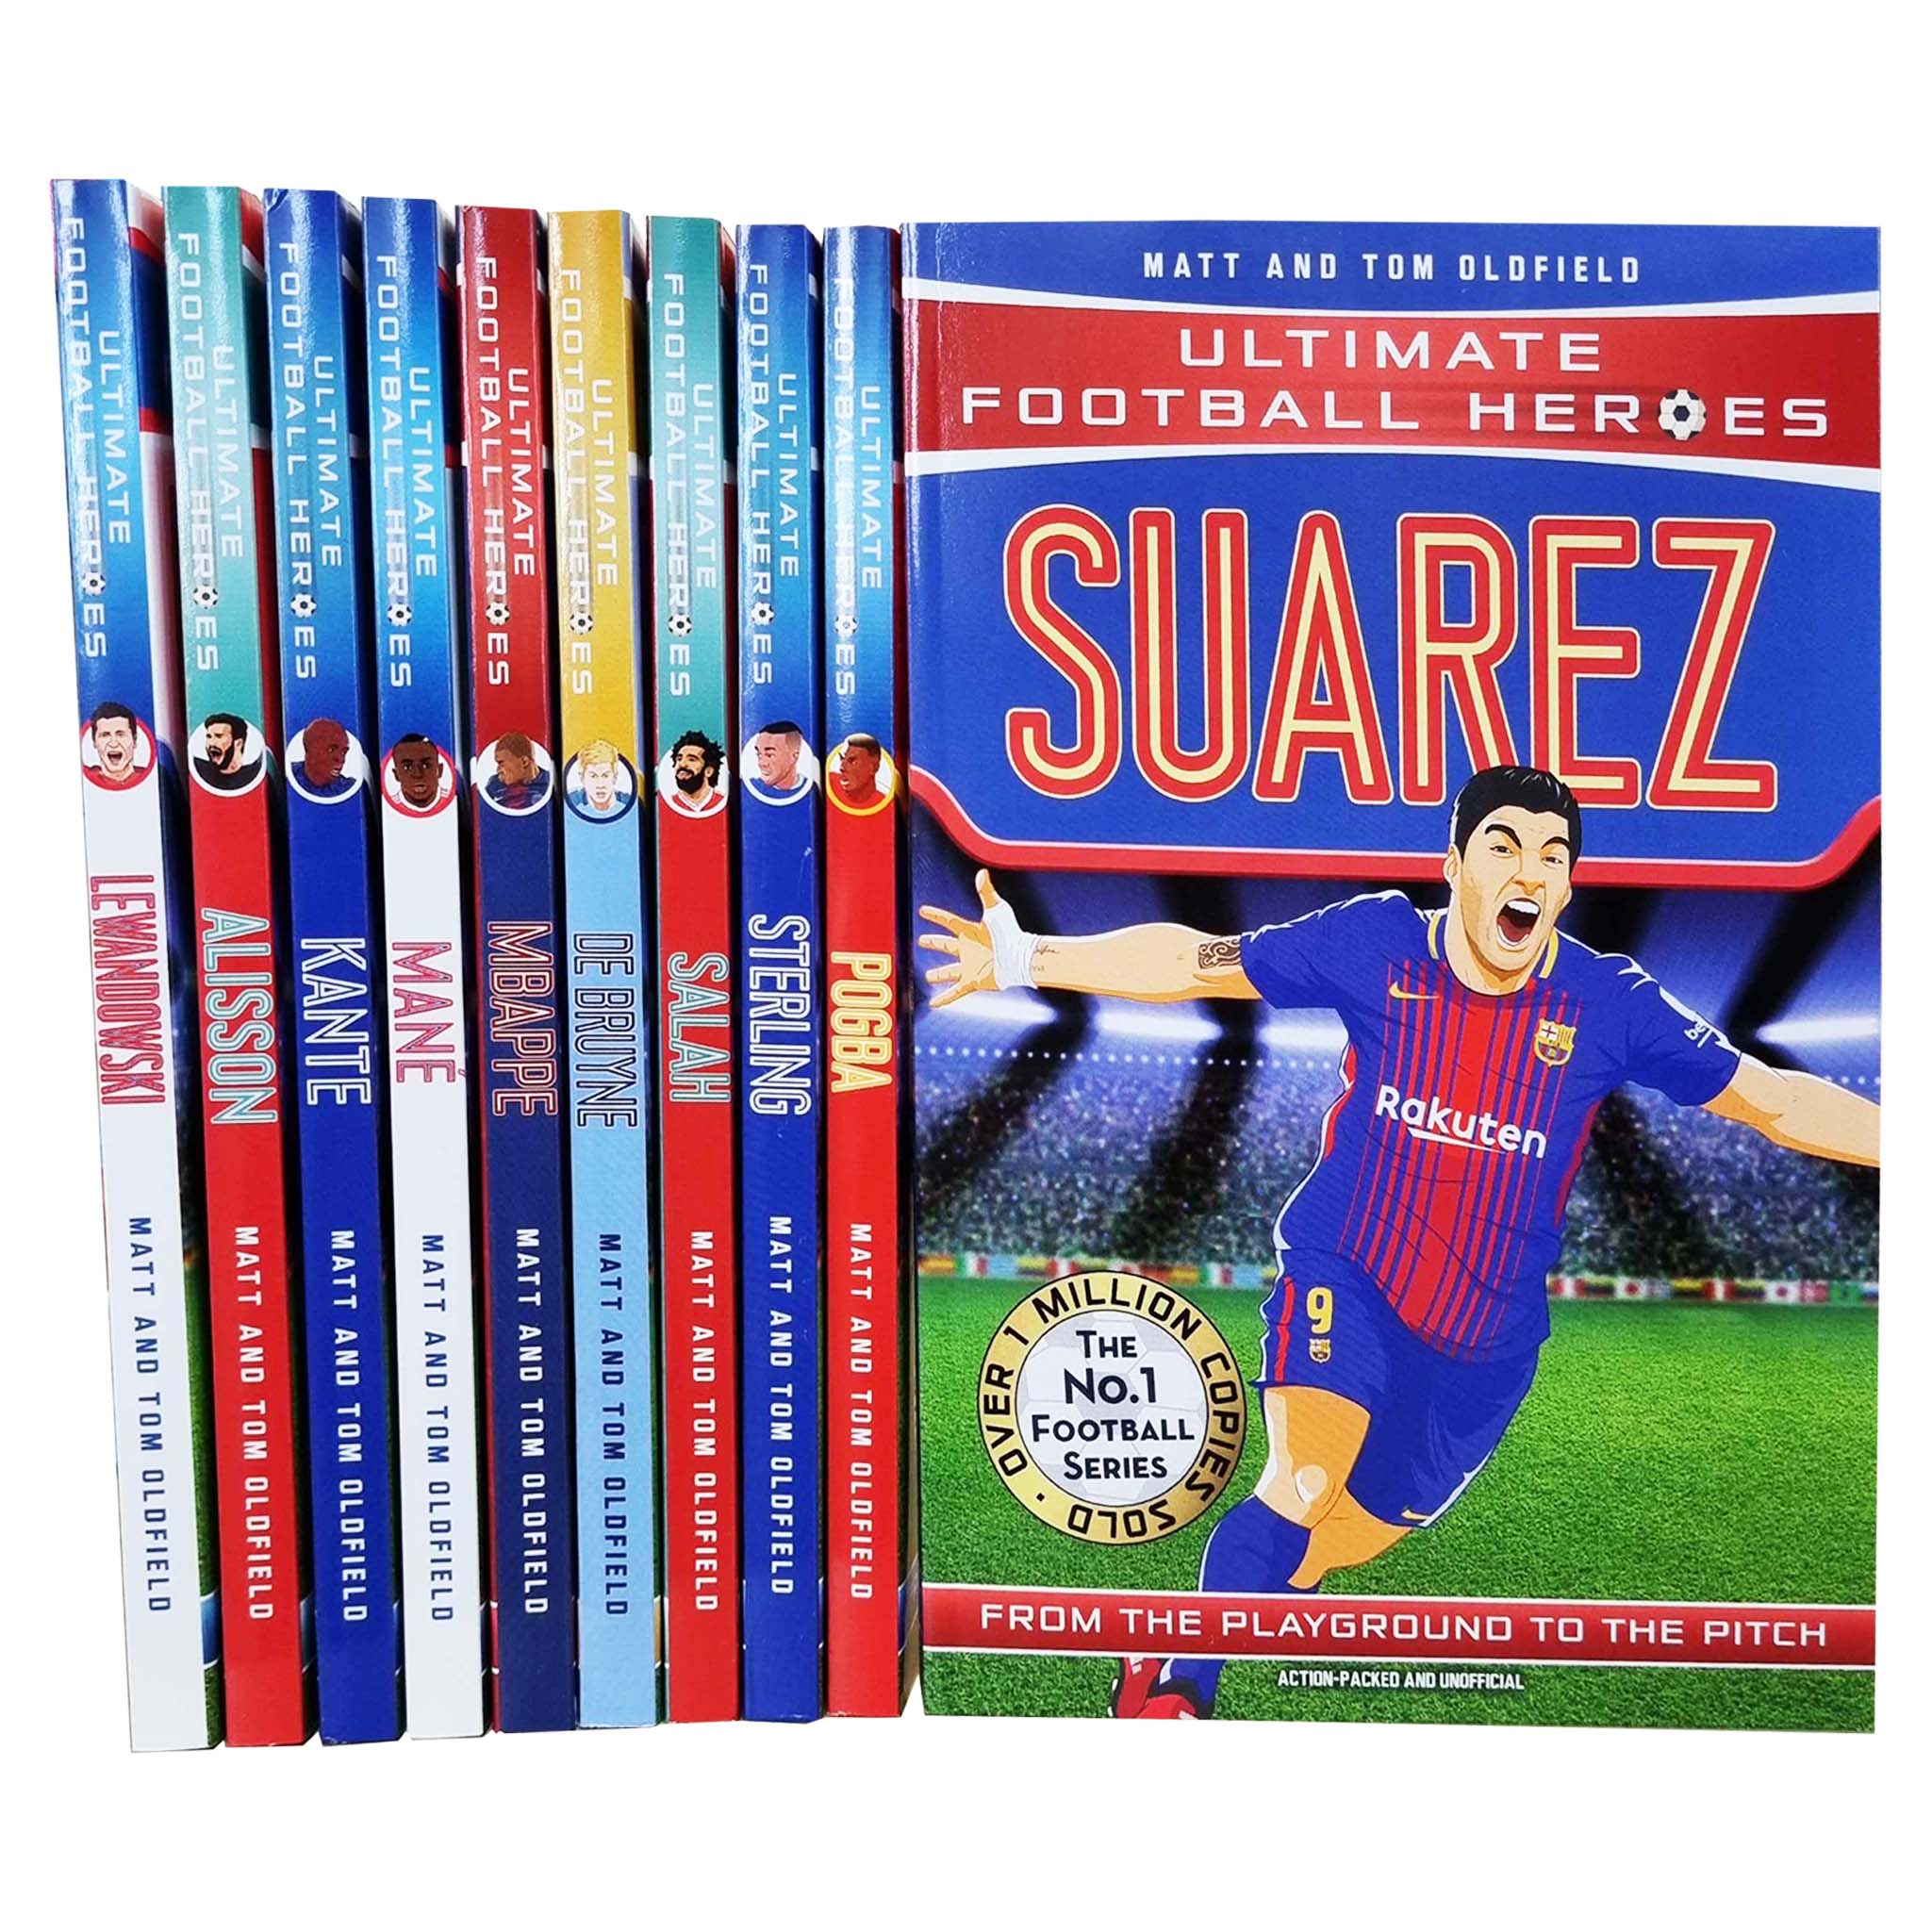 Books　Suarez,　Ultimate　Pogb　10　Heroes　Football　Collection　Series　Set